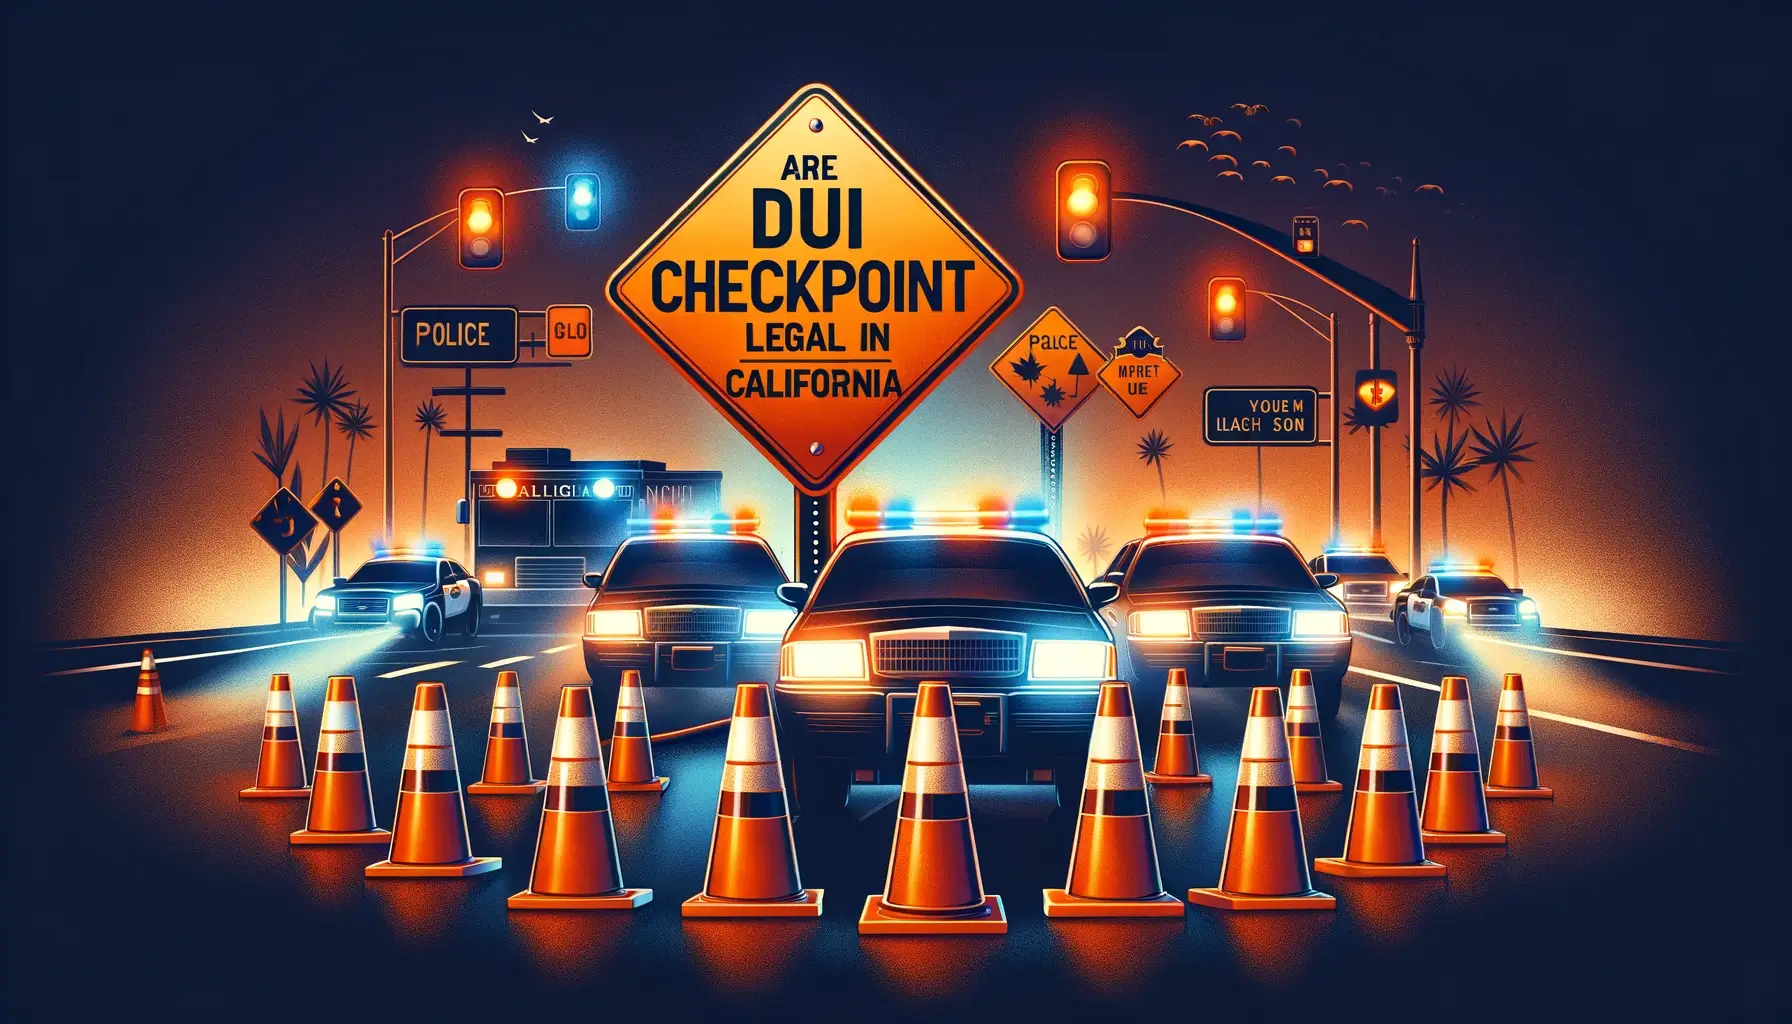 are dui checkpoints legal in california